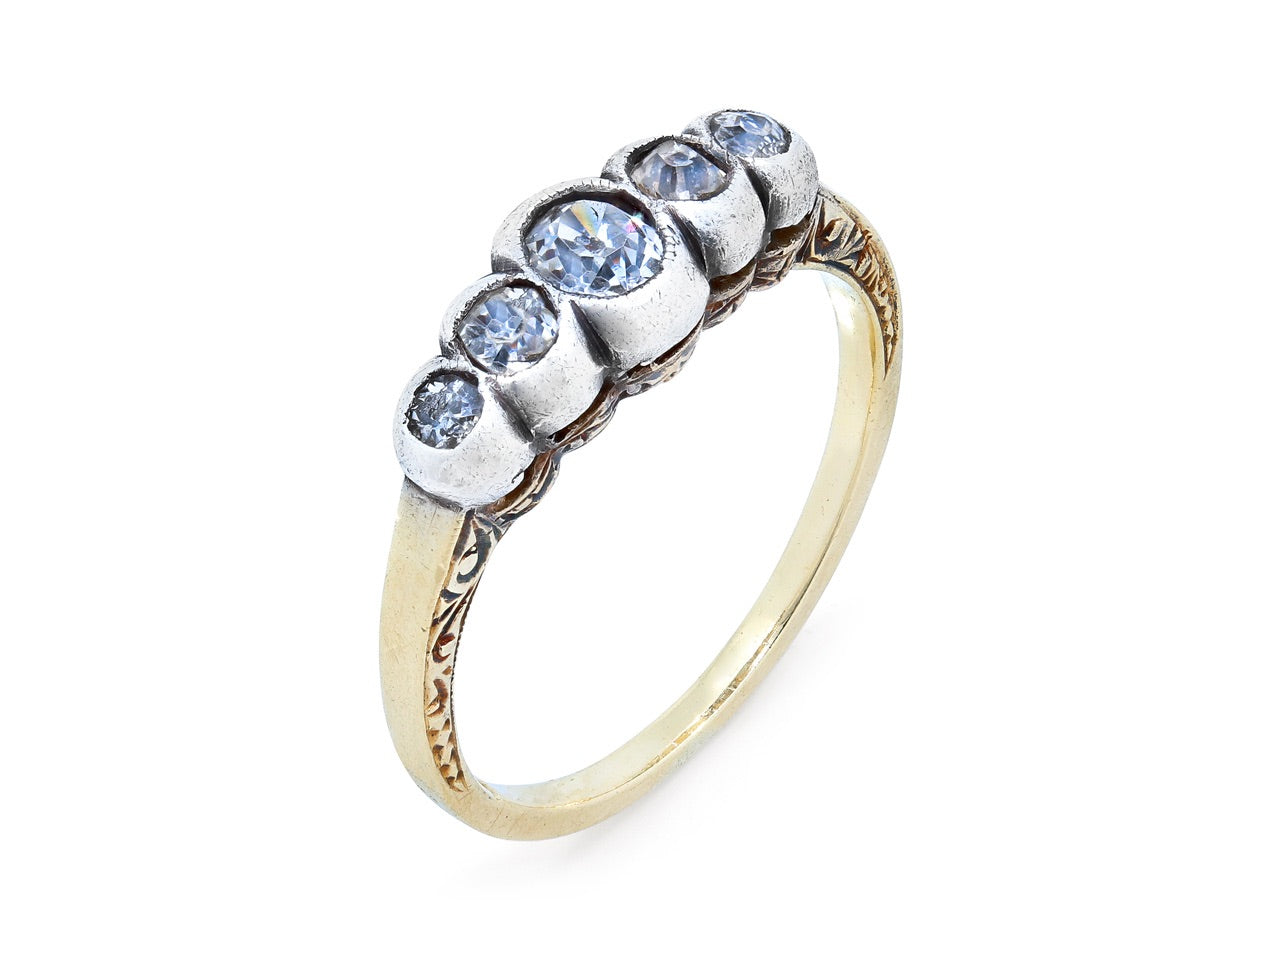 Antique Five-stone Diamond Ring in 15K Gold and Silver